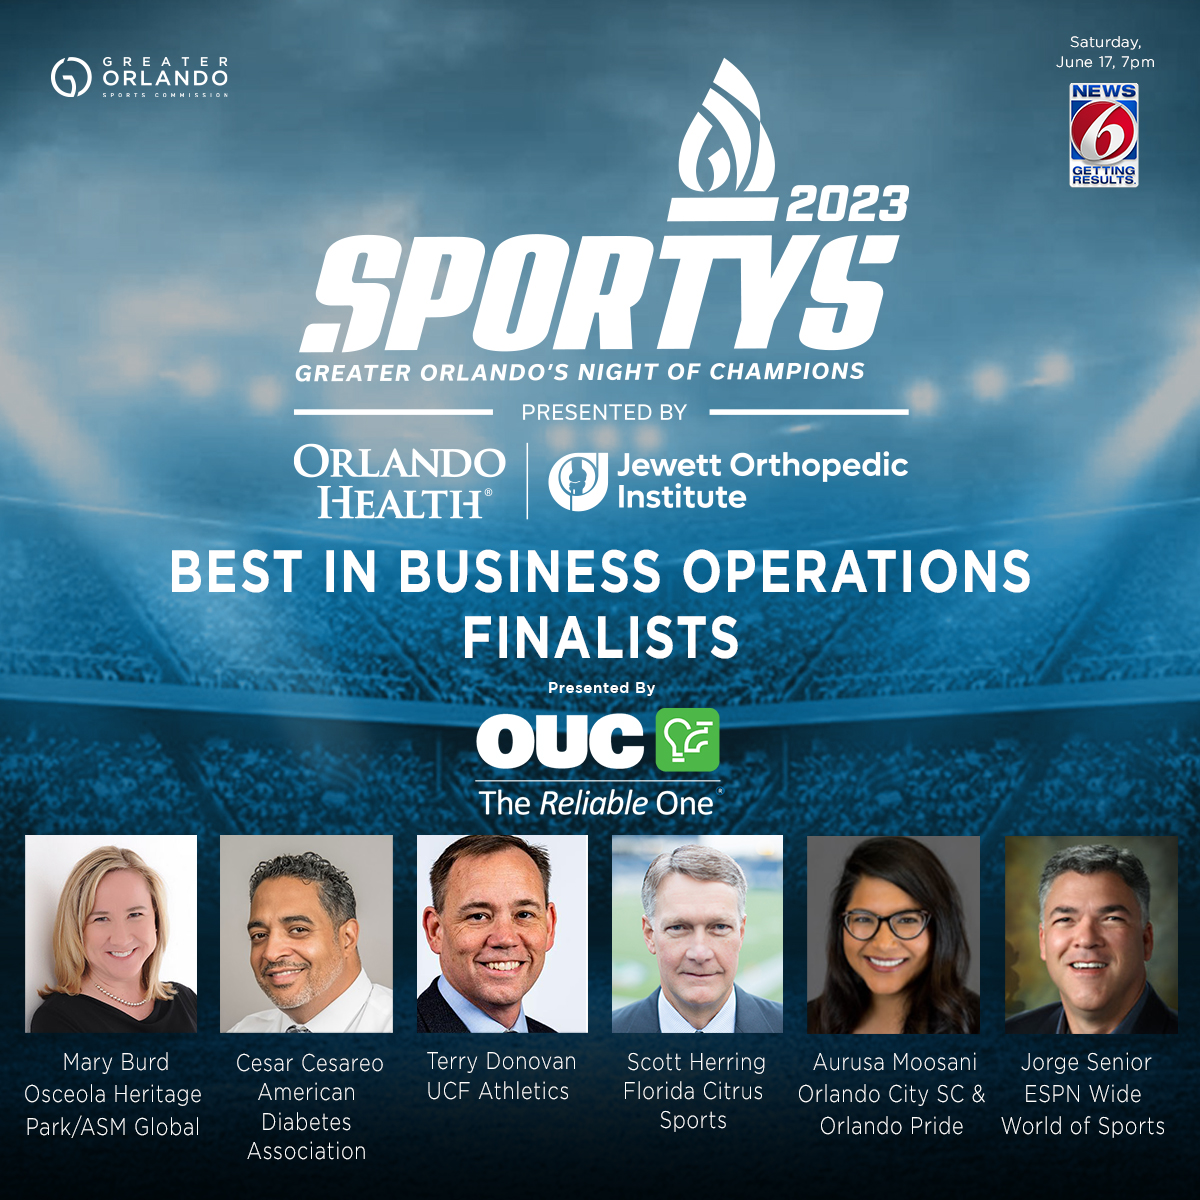 GO Sports - Social IG - SPORTYS 2023 6 finalists - Business Operations copy